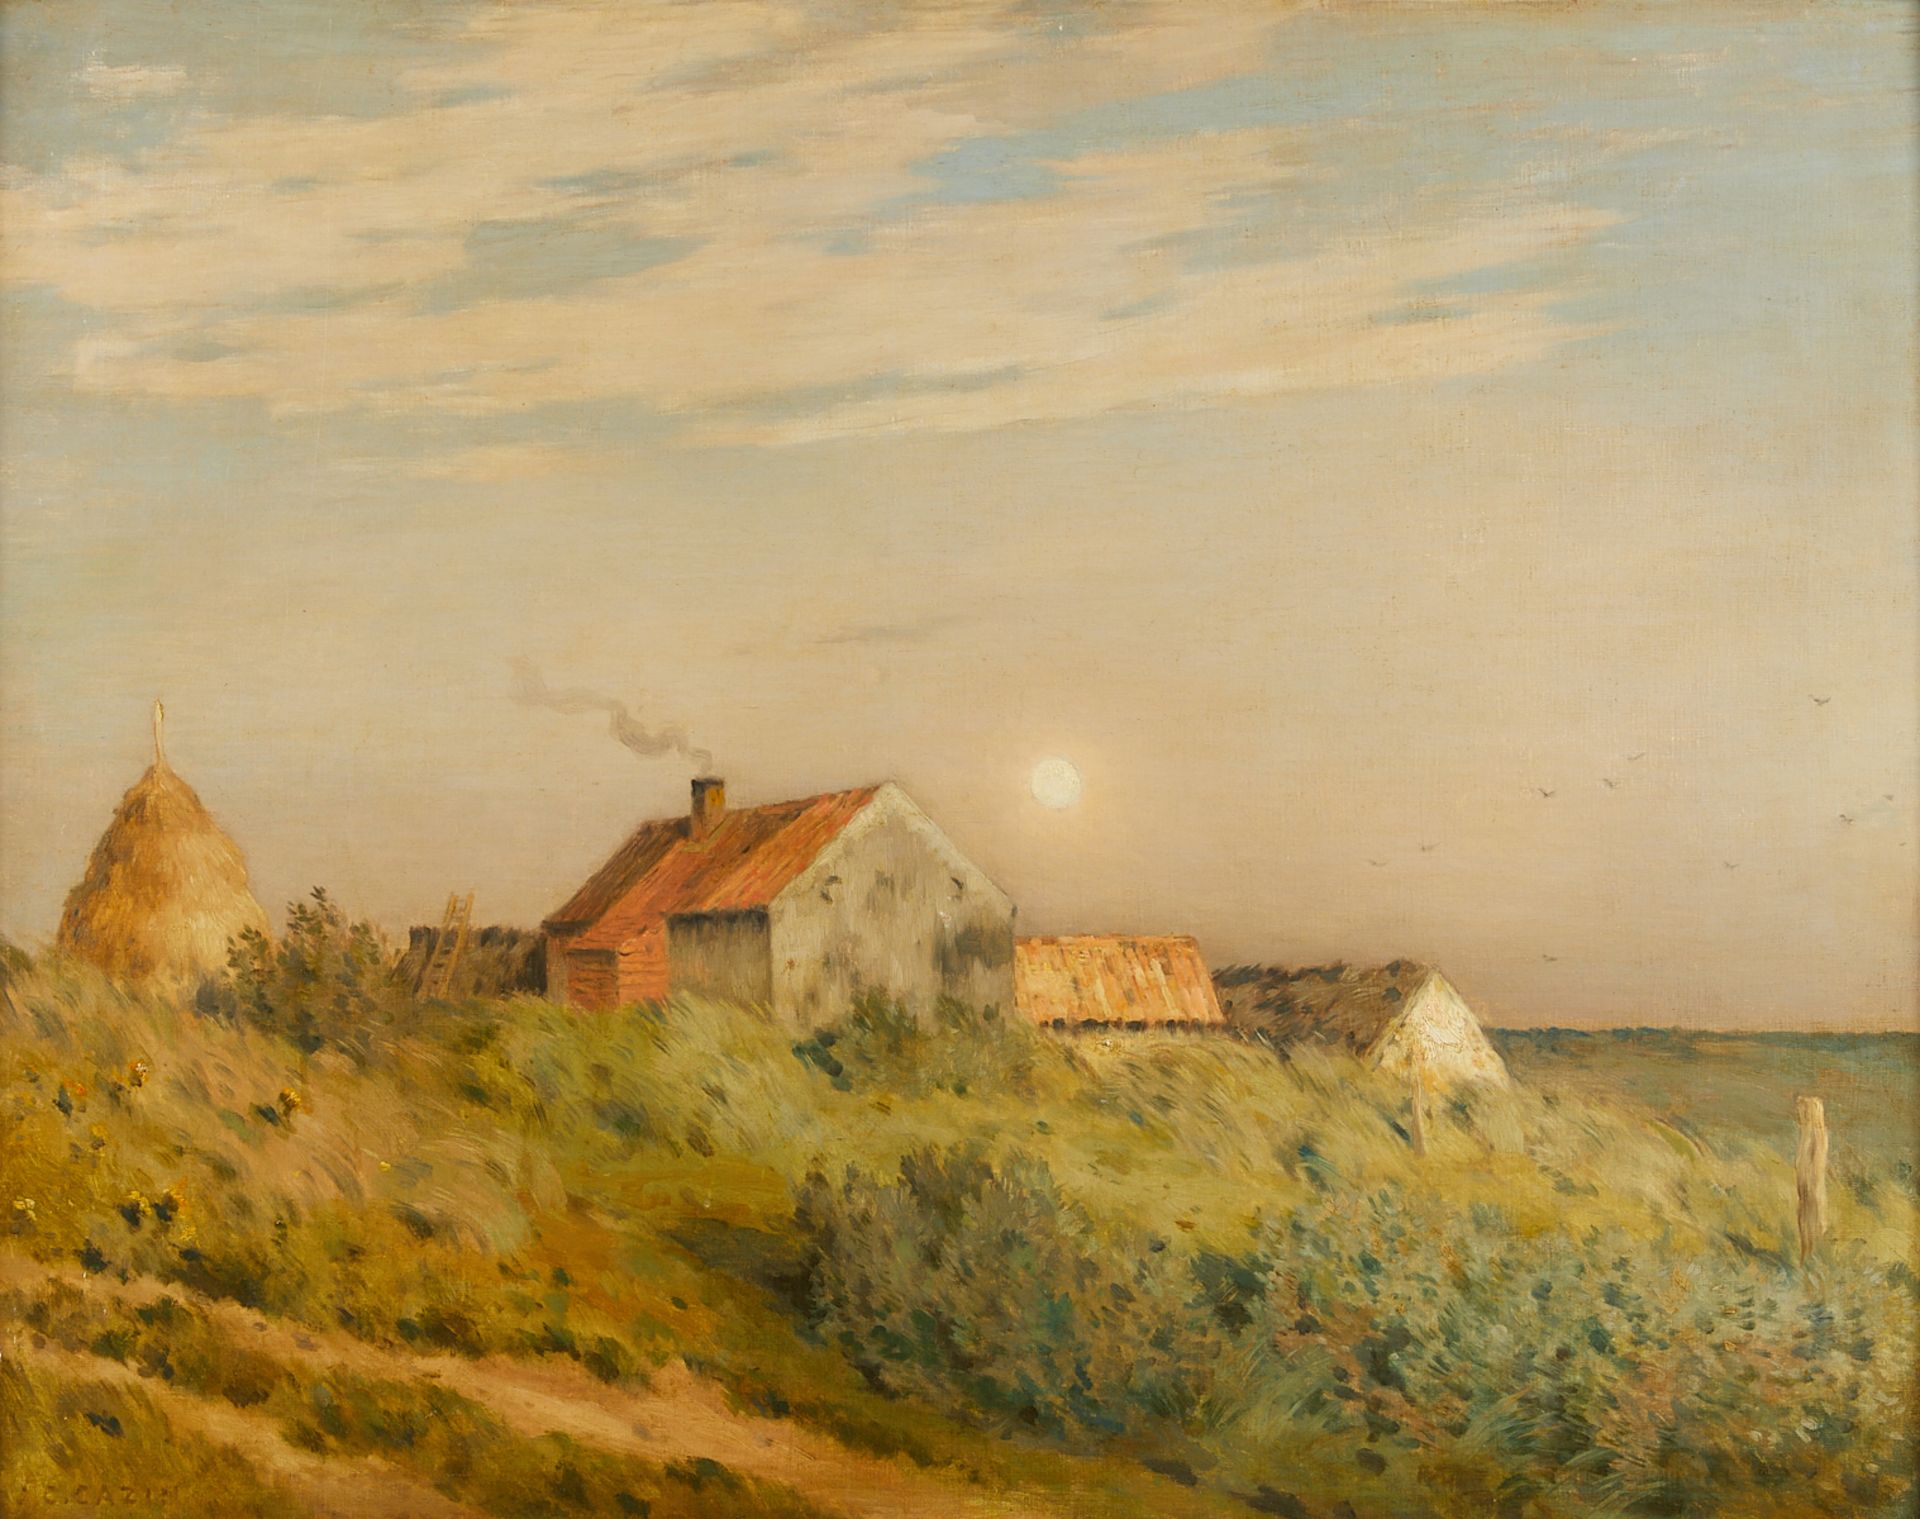 Jean-Charles Cazin Countryside Landscape Painting - Image 3 of 10